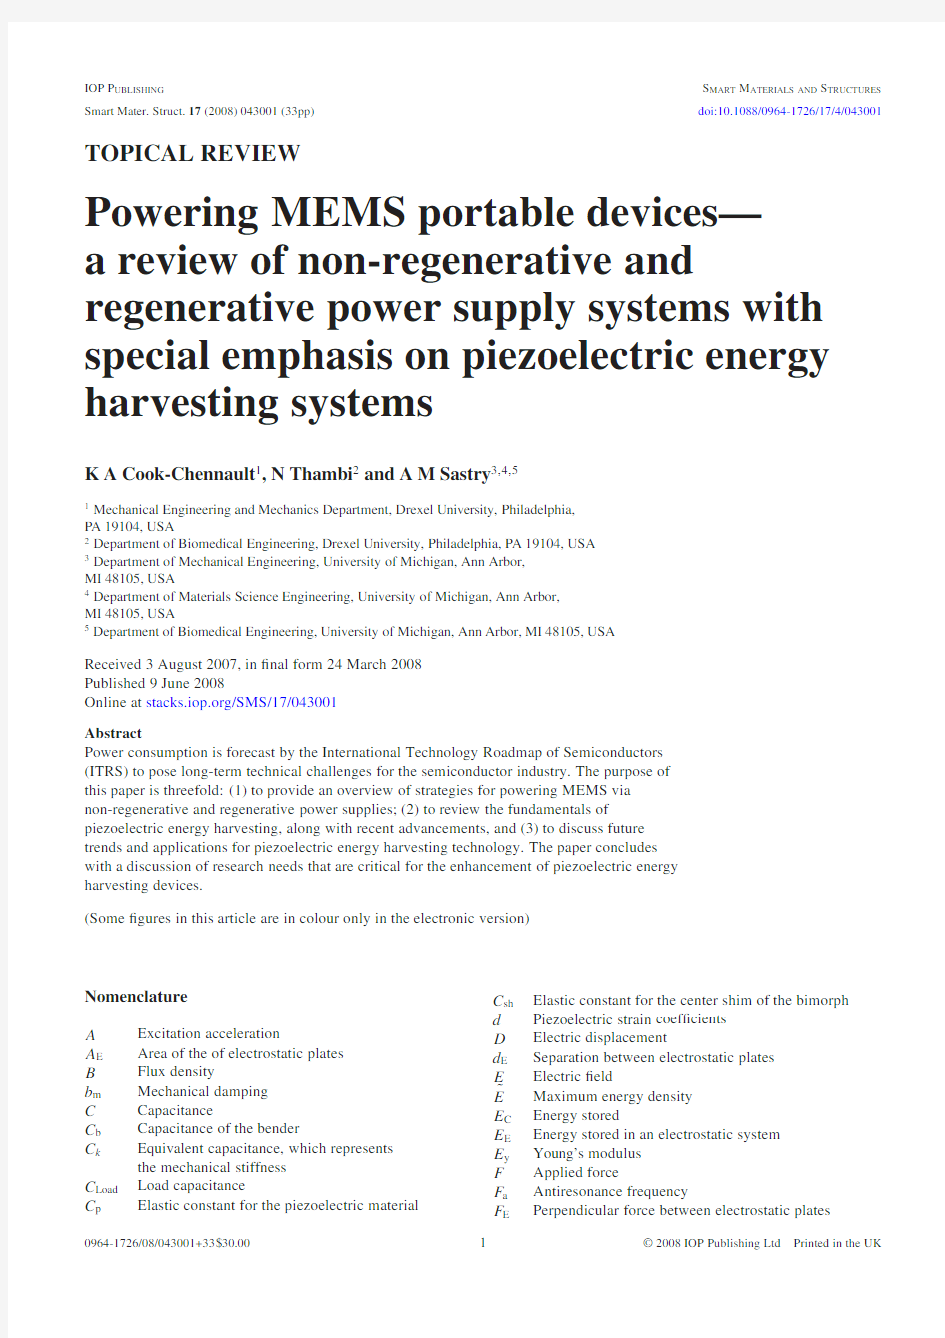 2008_a review of non-regenerative and regenerative power supply systems with special emphasis on pie